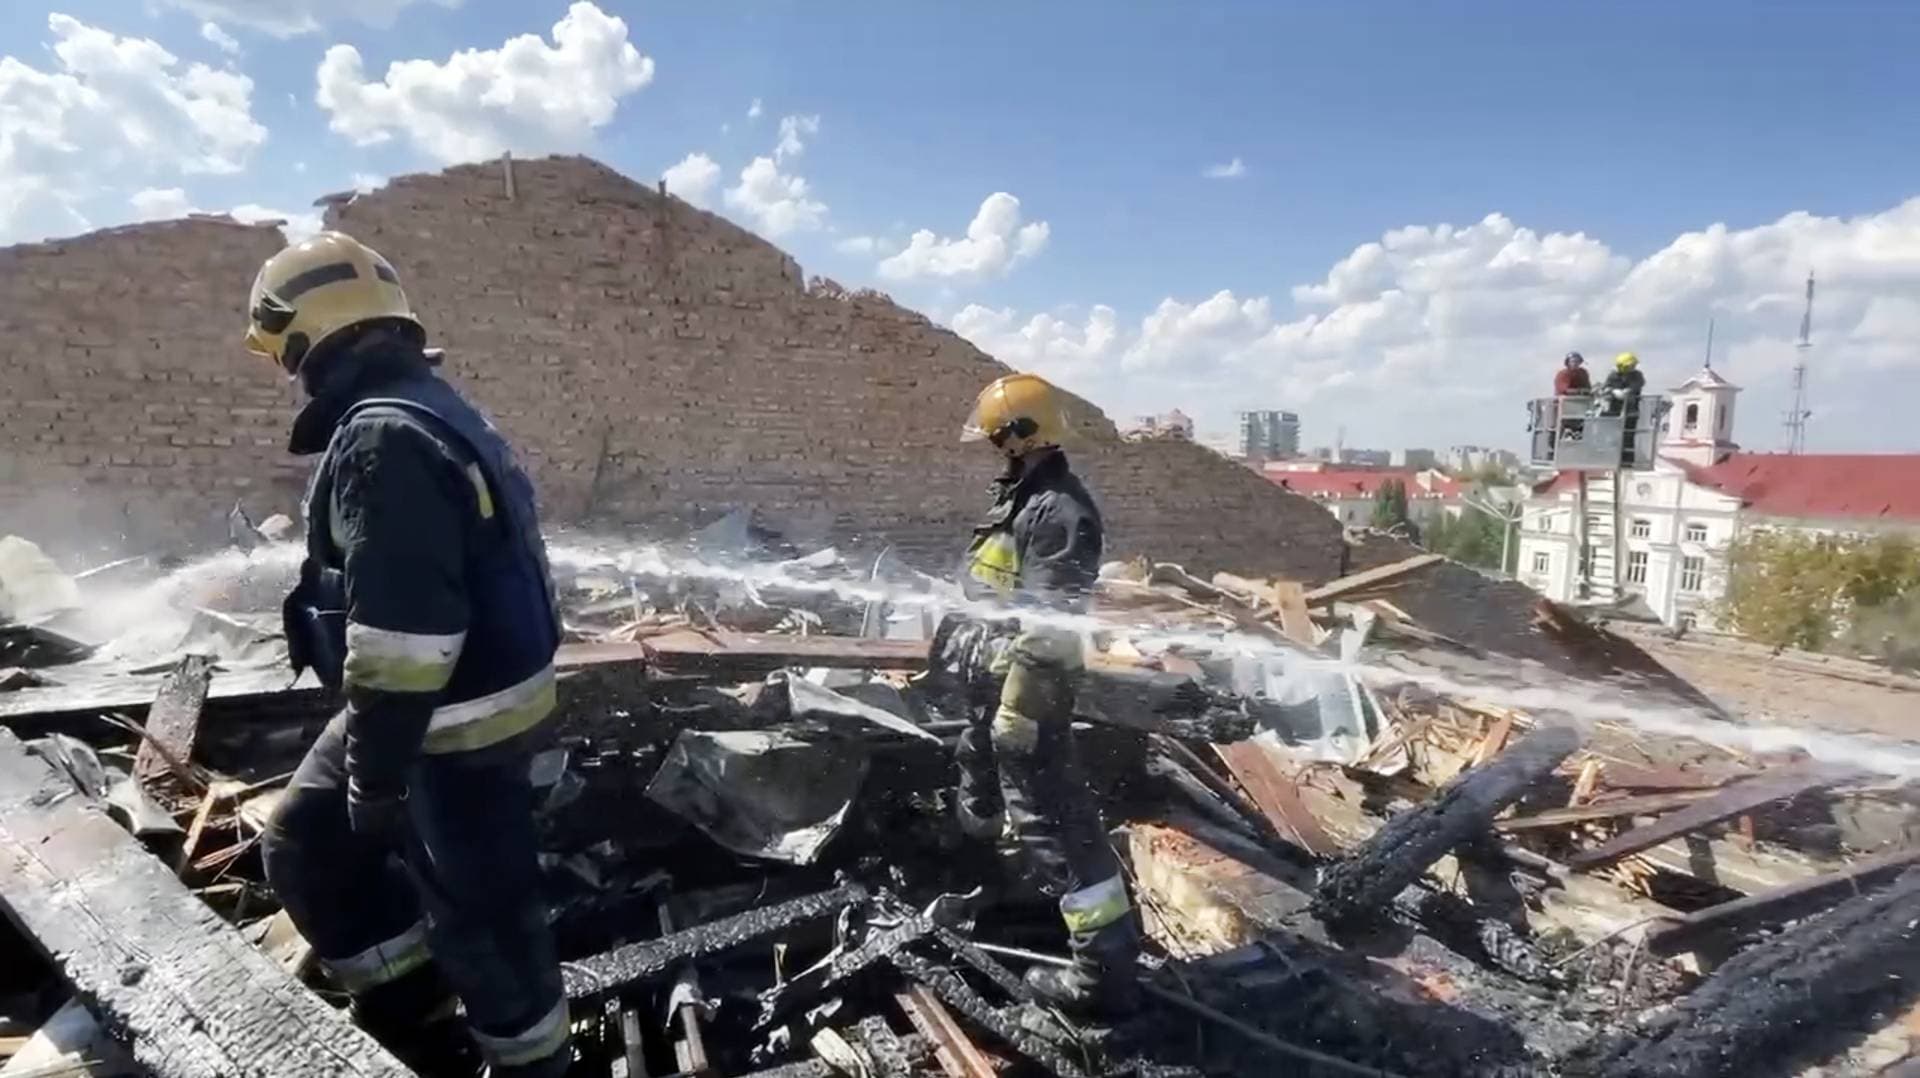 firefighters work on the roof of the Taras Shevchenko Chernihiv Regional Academic Music and Drama Theatre damaged by Russian attack in Chernihiv